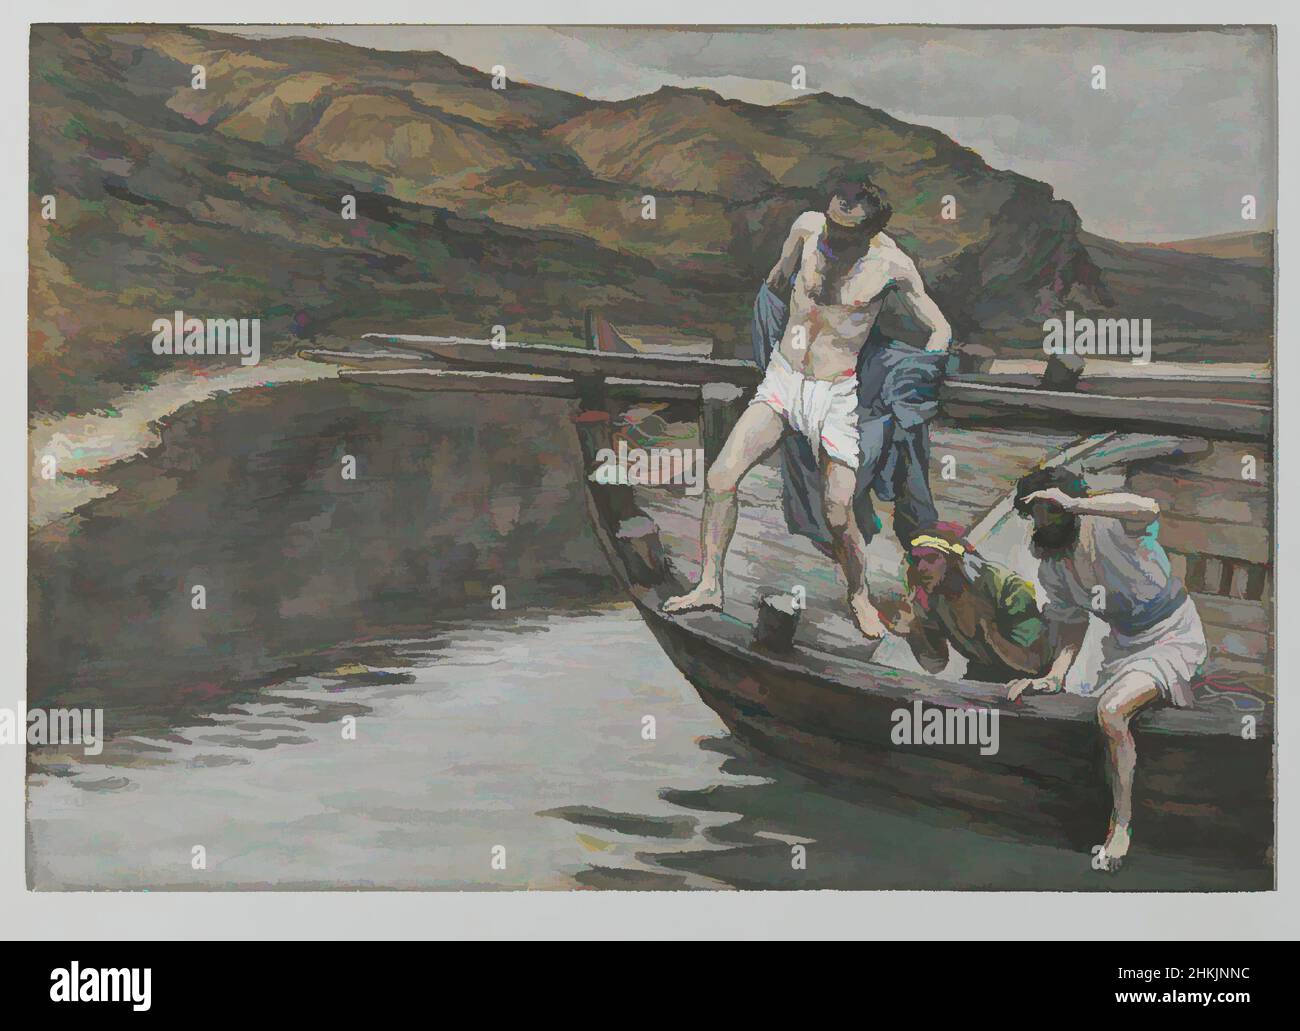 Art inspired by Saint Peter Alerted by Saint John to the Presence of the Lord Casts Himself into the Water, Saint Pierre averti par Saint Jean que le Seigneur est là se jette à l'eau, The Life of Our Lord Jesus Christ, La Vie de Notre-Seigneur Jésus-Christ, James Tissot, French, 1836-, Classic works modernized by Artotop with a splash of modernity. Shapes, color and value, eye-catching visual impact on art. Emotions through freedom of artworks in a contemporary way. A timeless message pursuing a wildly creative new direction. Artists turning to the digital medium and creating the Artotop NFT Stock Photo